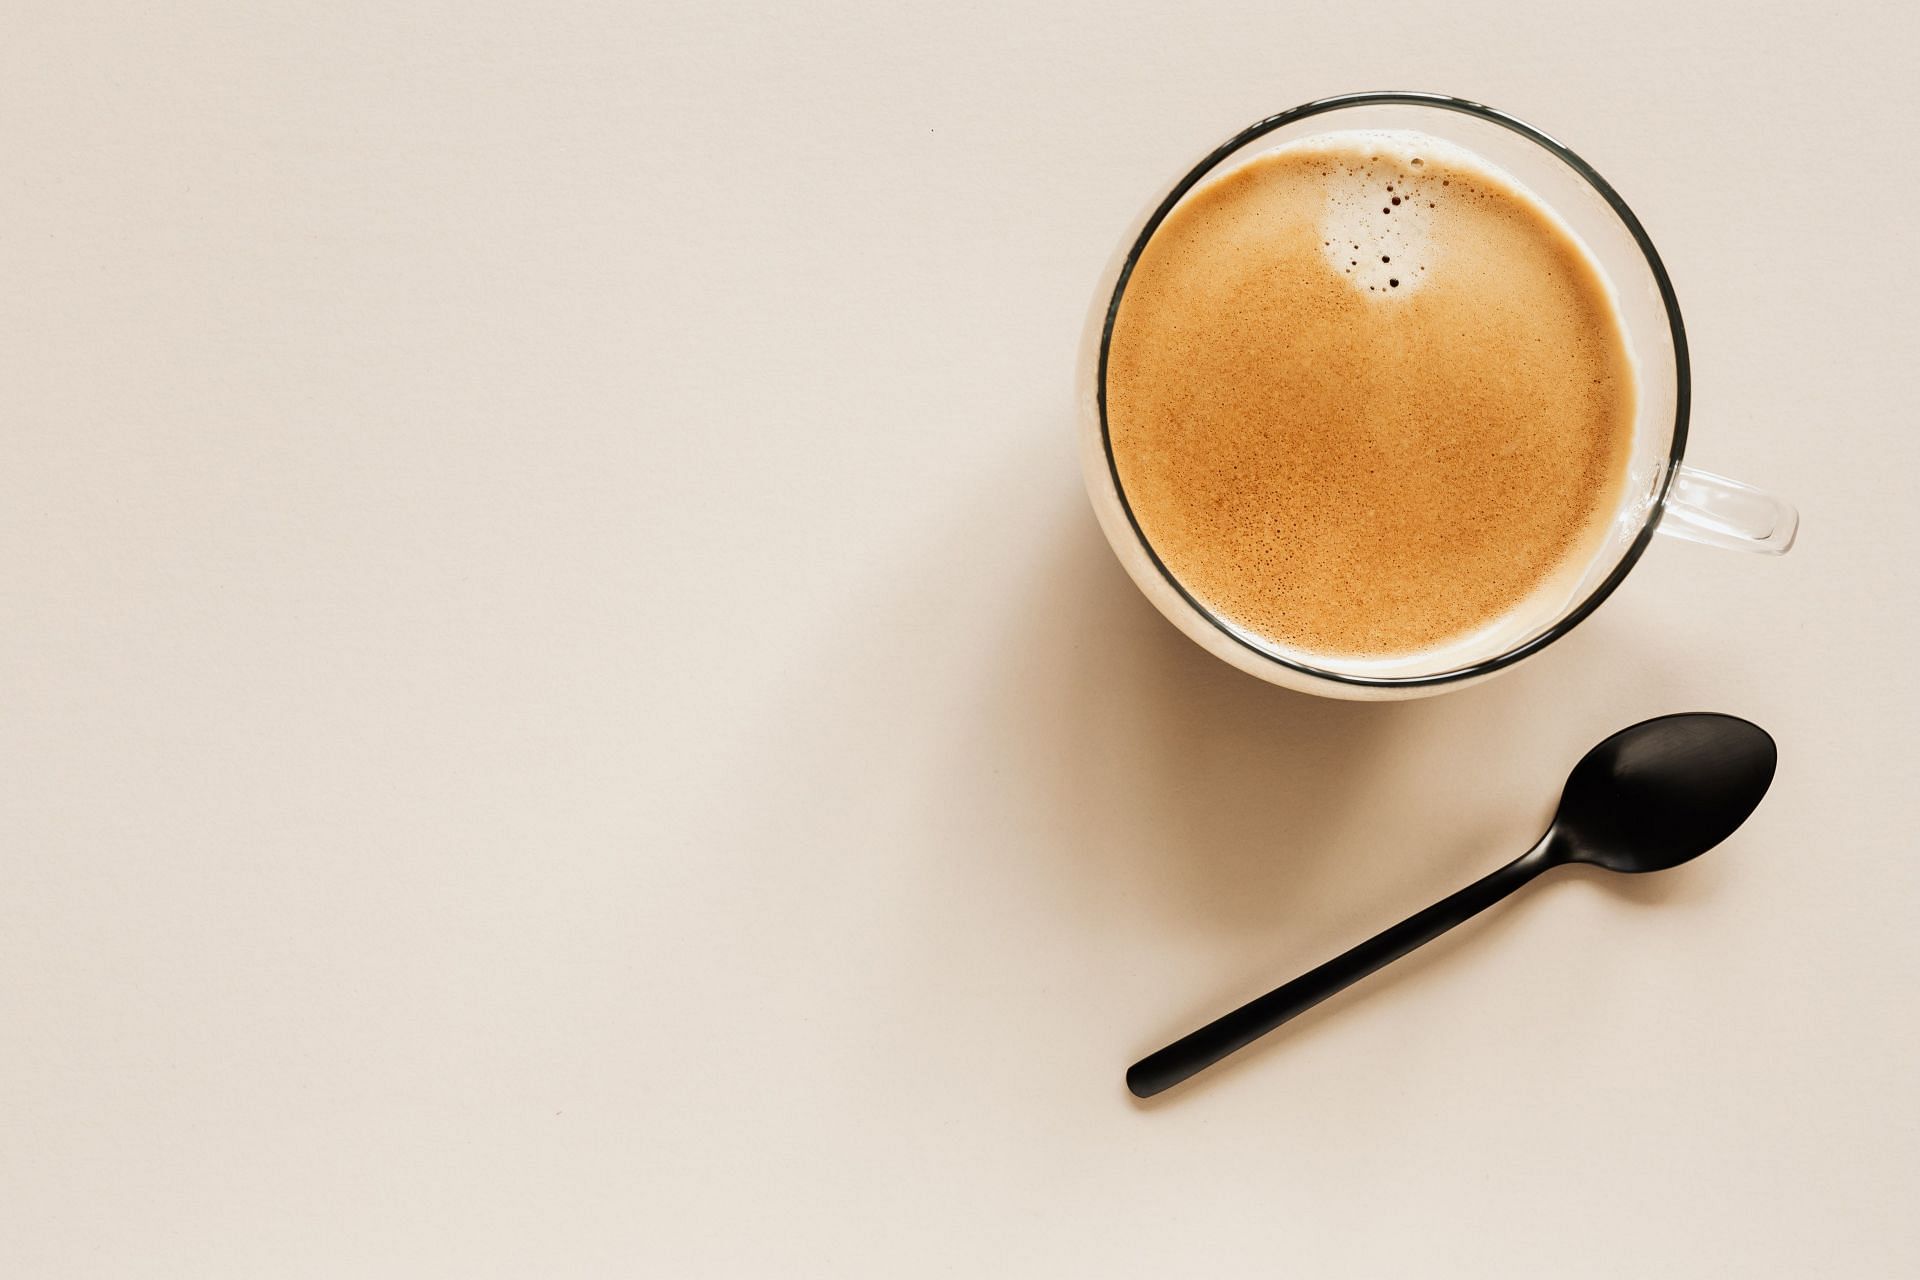 Is chai tea good for you? - Too much of chai can cause anxiety and jitters. (Image via Pexels / Karolina grabowska)